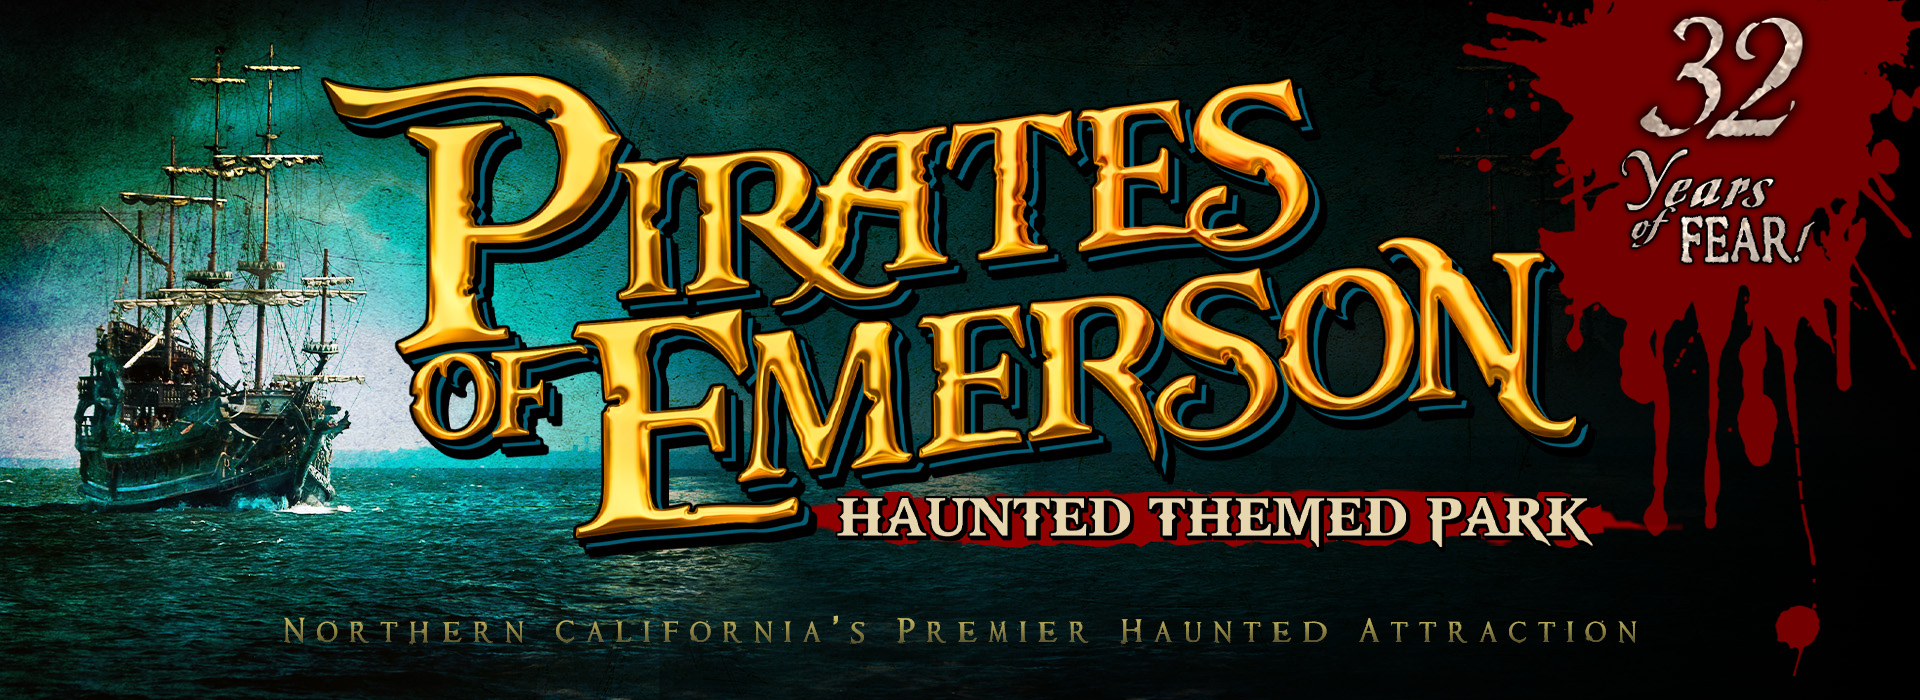 Pirates of Emerson Haunted Theme Park (Oct 24-27)